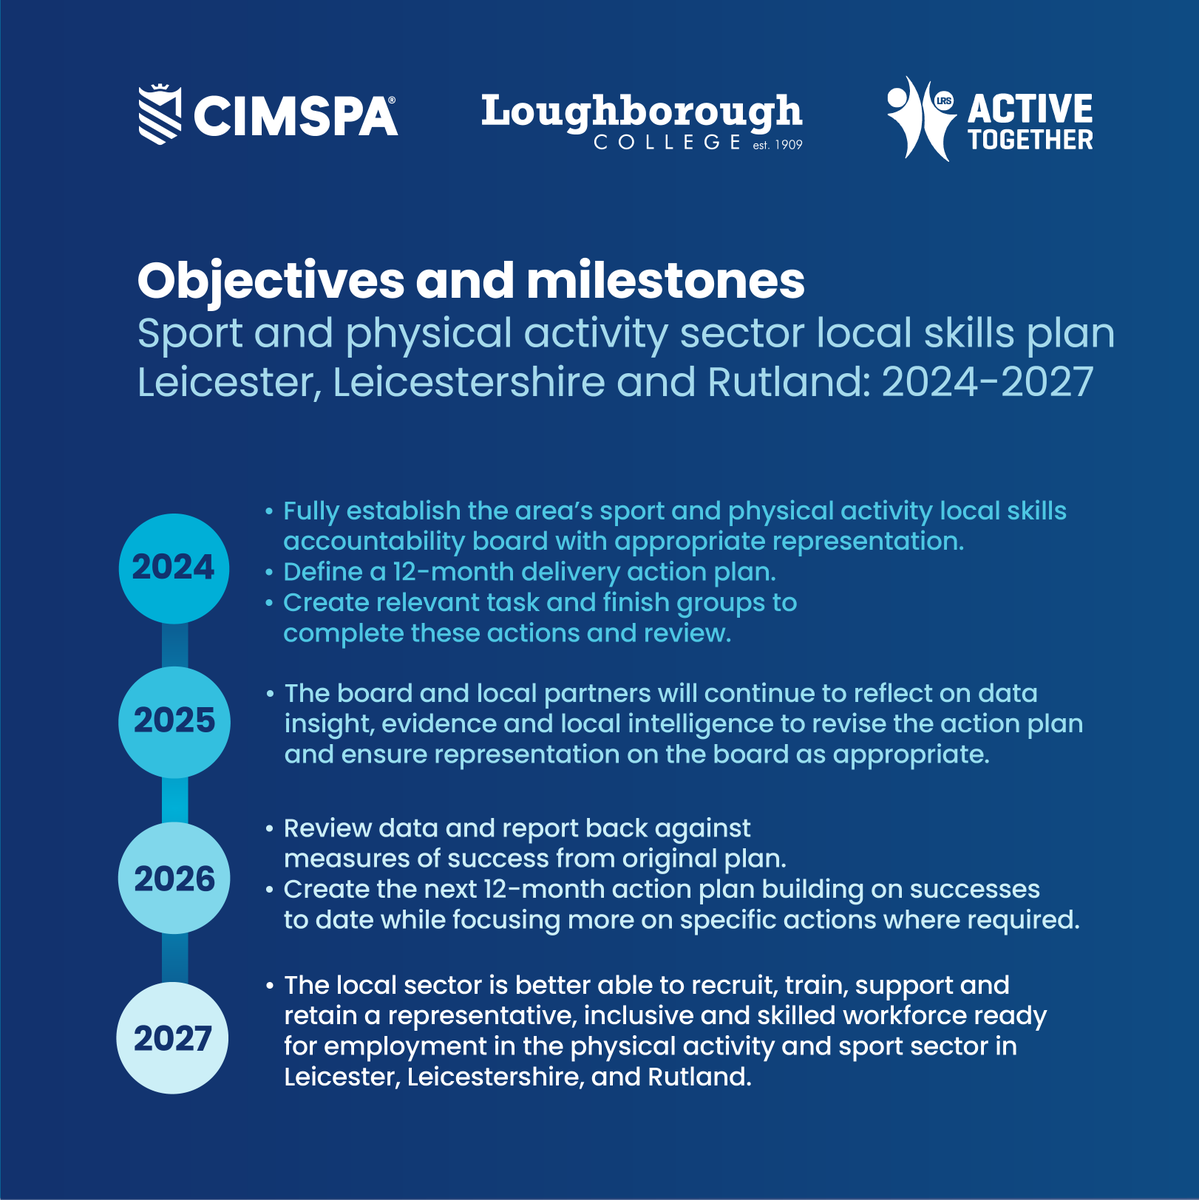 What are our Local Skills Plans aiming to achieve? Take a look below at the objectives and milestones for Leicester, Leicestershire and Rutland 👇